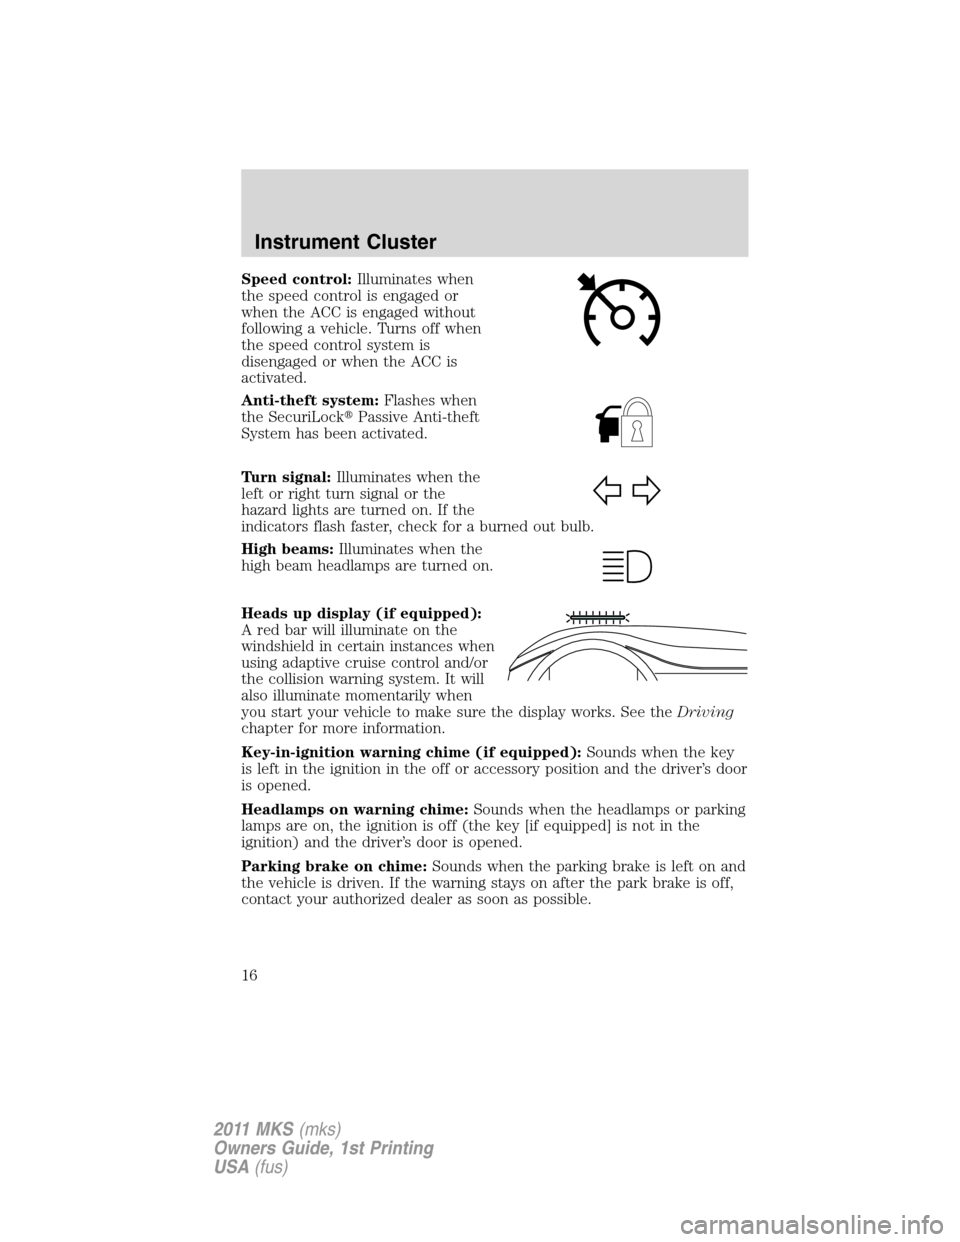 LINCOLN MKS 2011  Owners Manual Speed control:Illuminates when
the speed control is engaged or
when the ACC is engaged without
following a vehicle. Turns off when
the speed control system is
disengaged or when the ACC is
activated.
